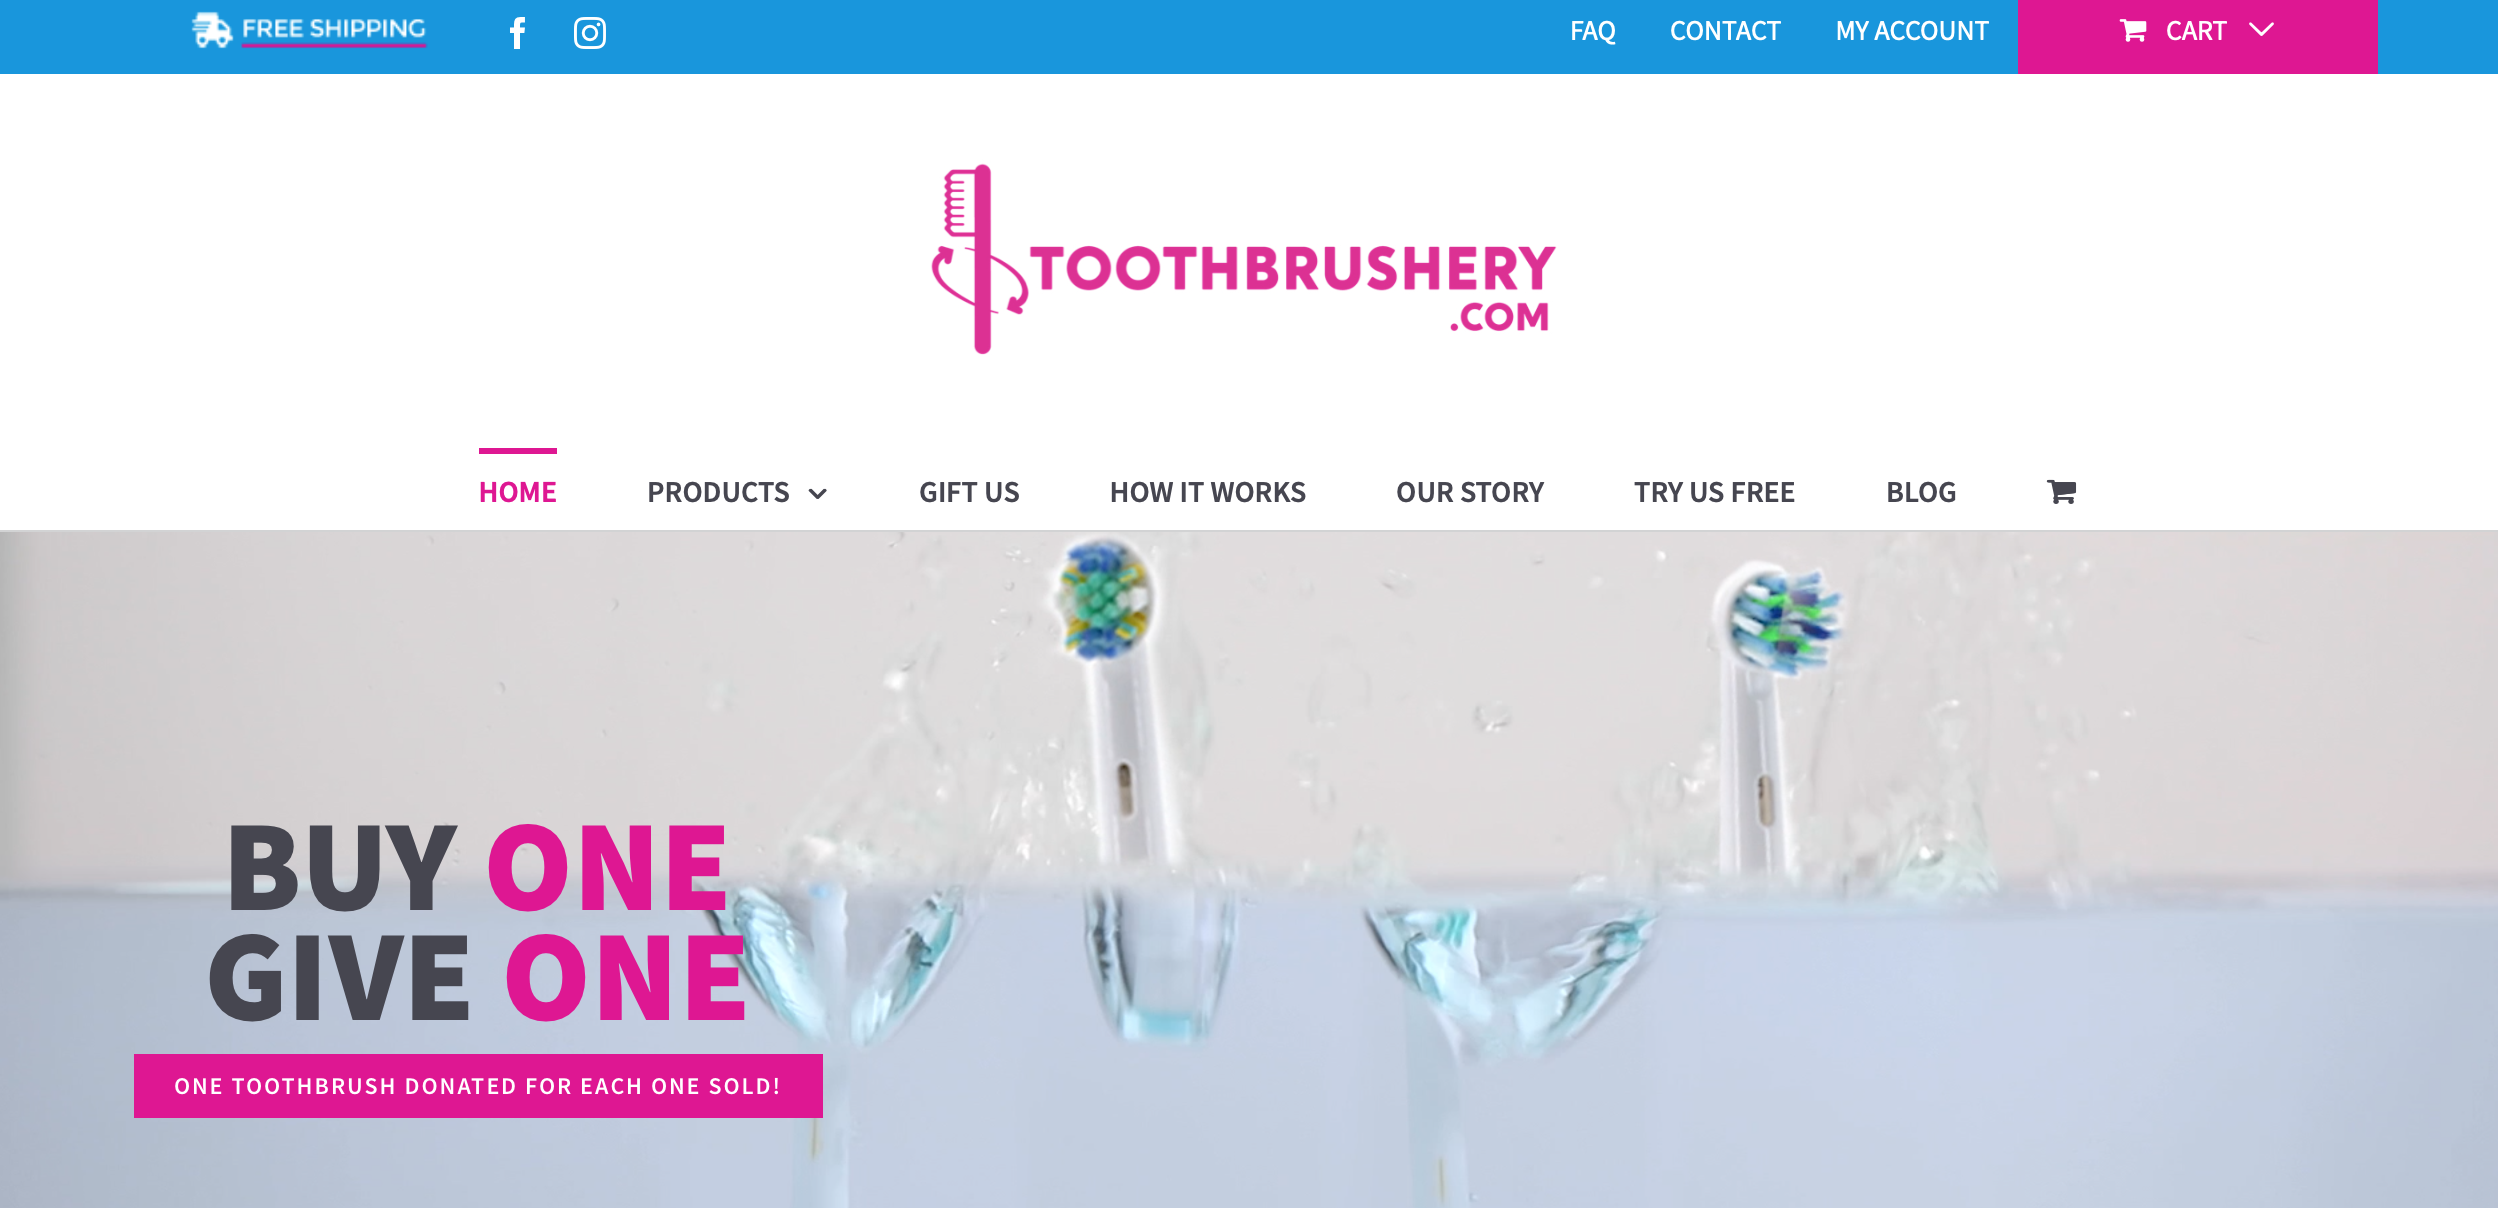 toothbrushery.com website designed by Puzzle Pieces Marketing